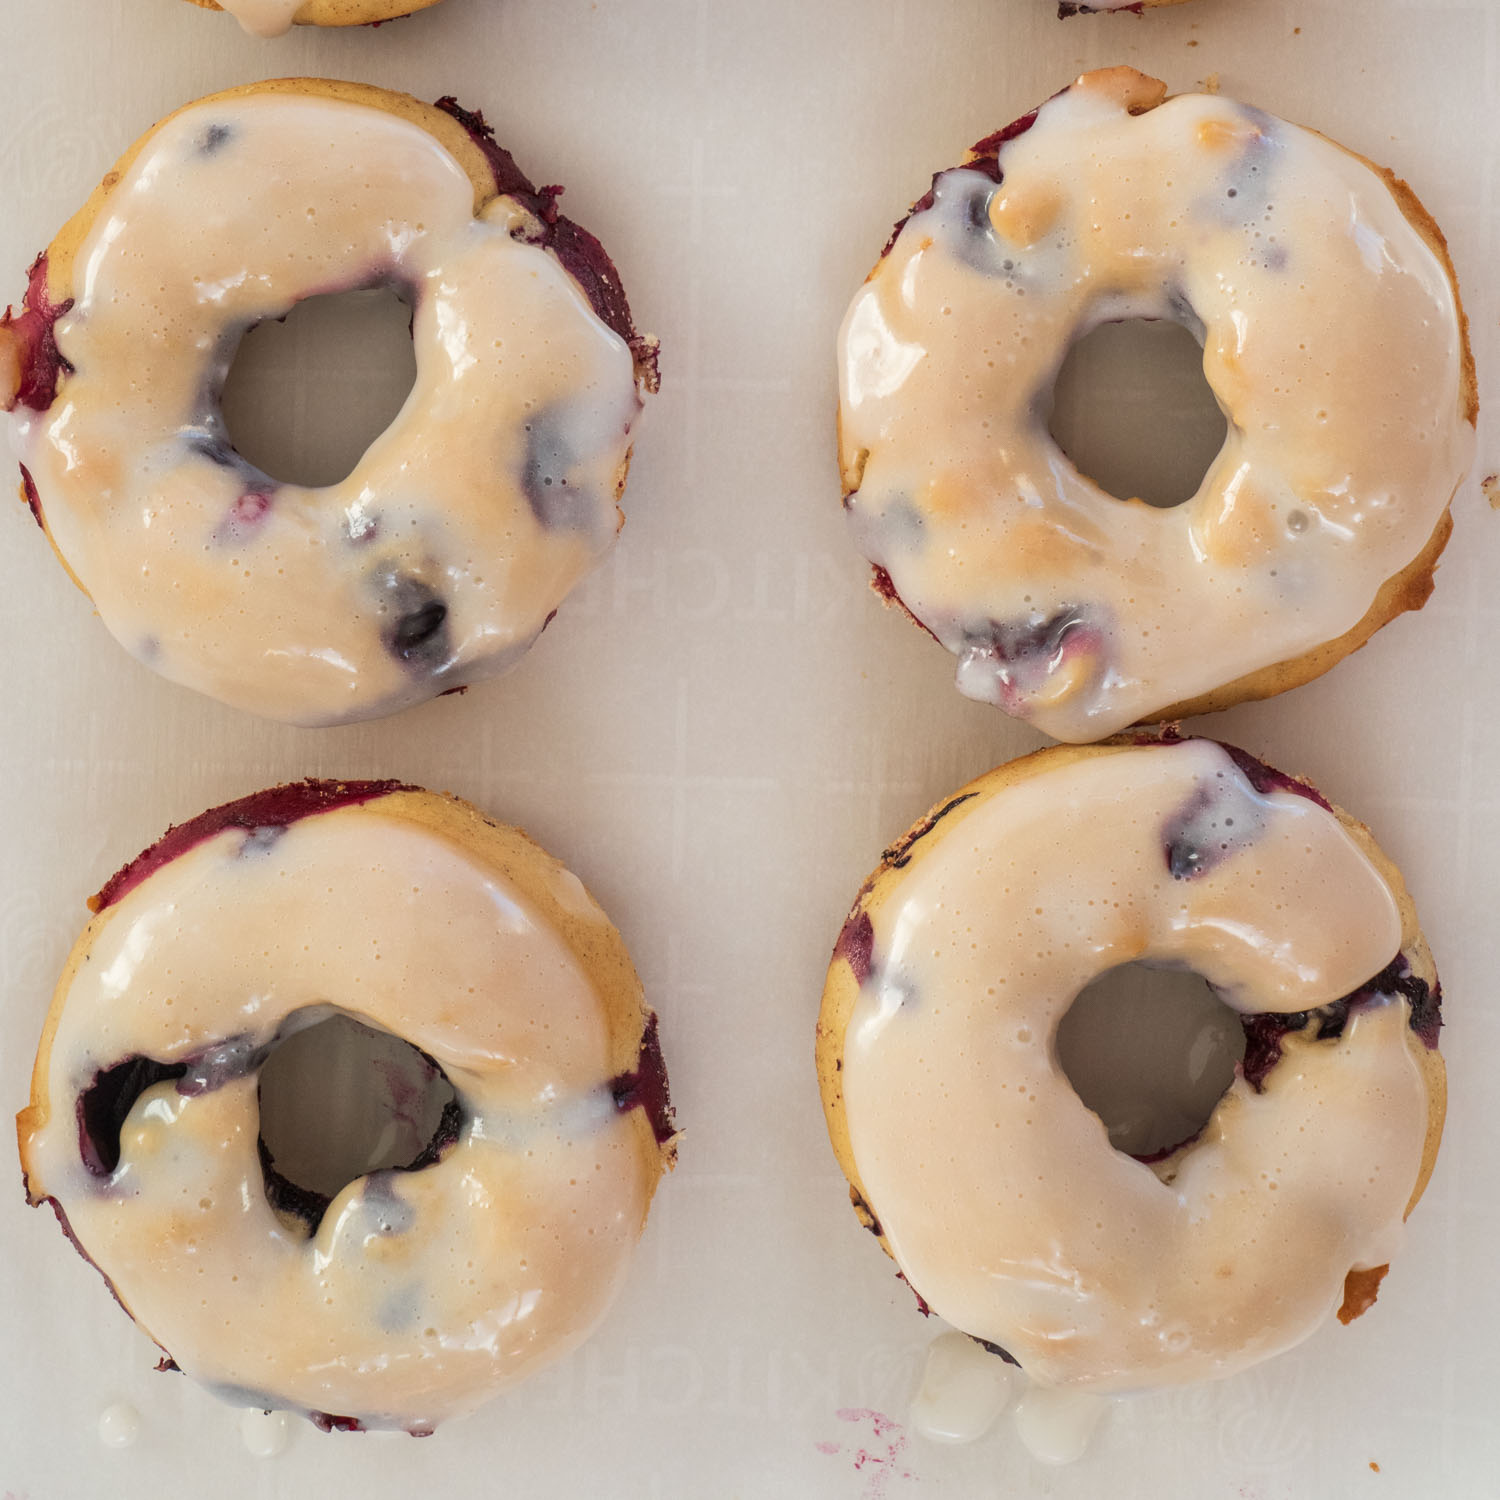 Baked Blueberry Donuts with Lemon Icing